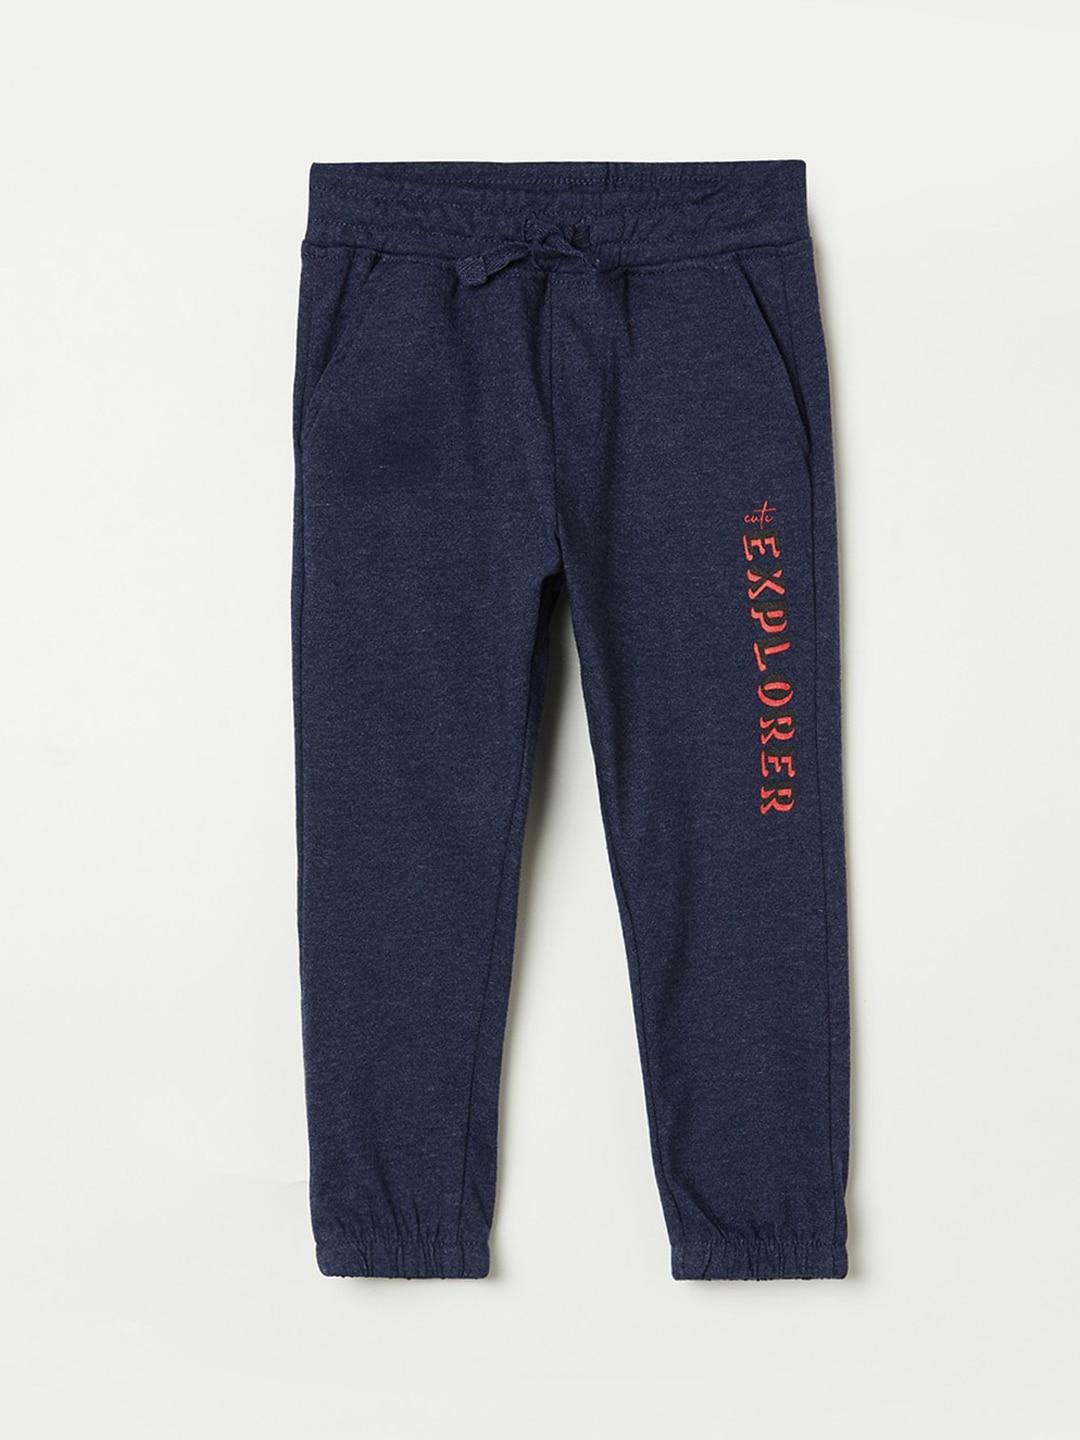 juniors-by-lifestyle-boys-navy-blue-solid-track-pants